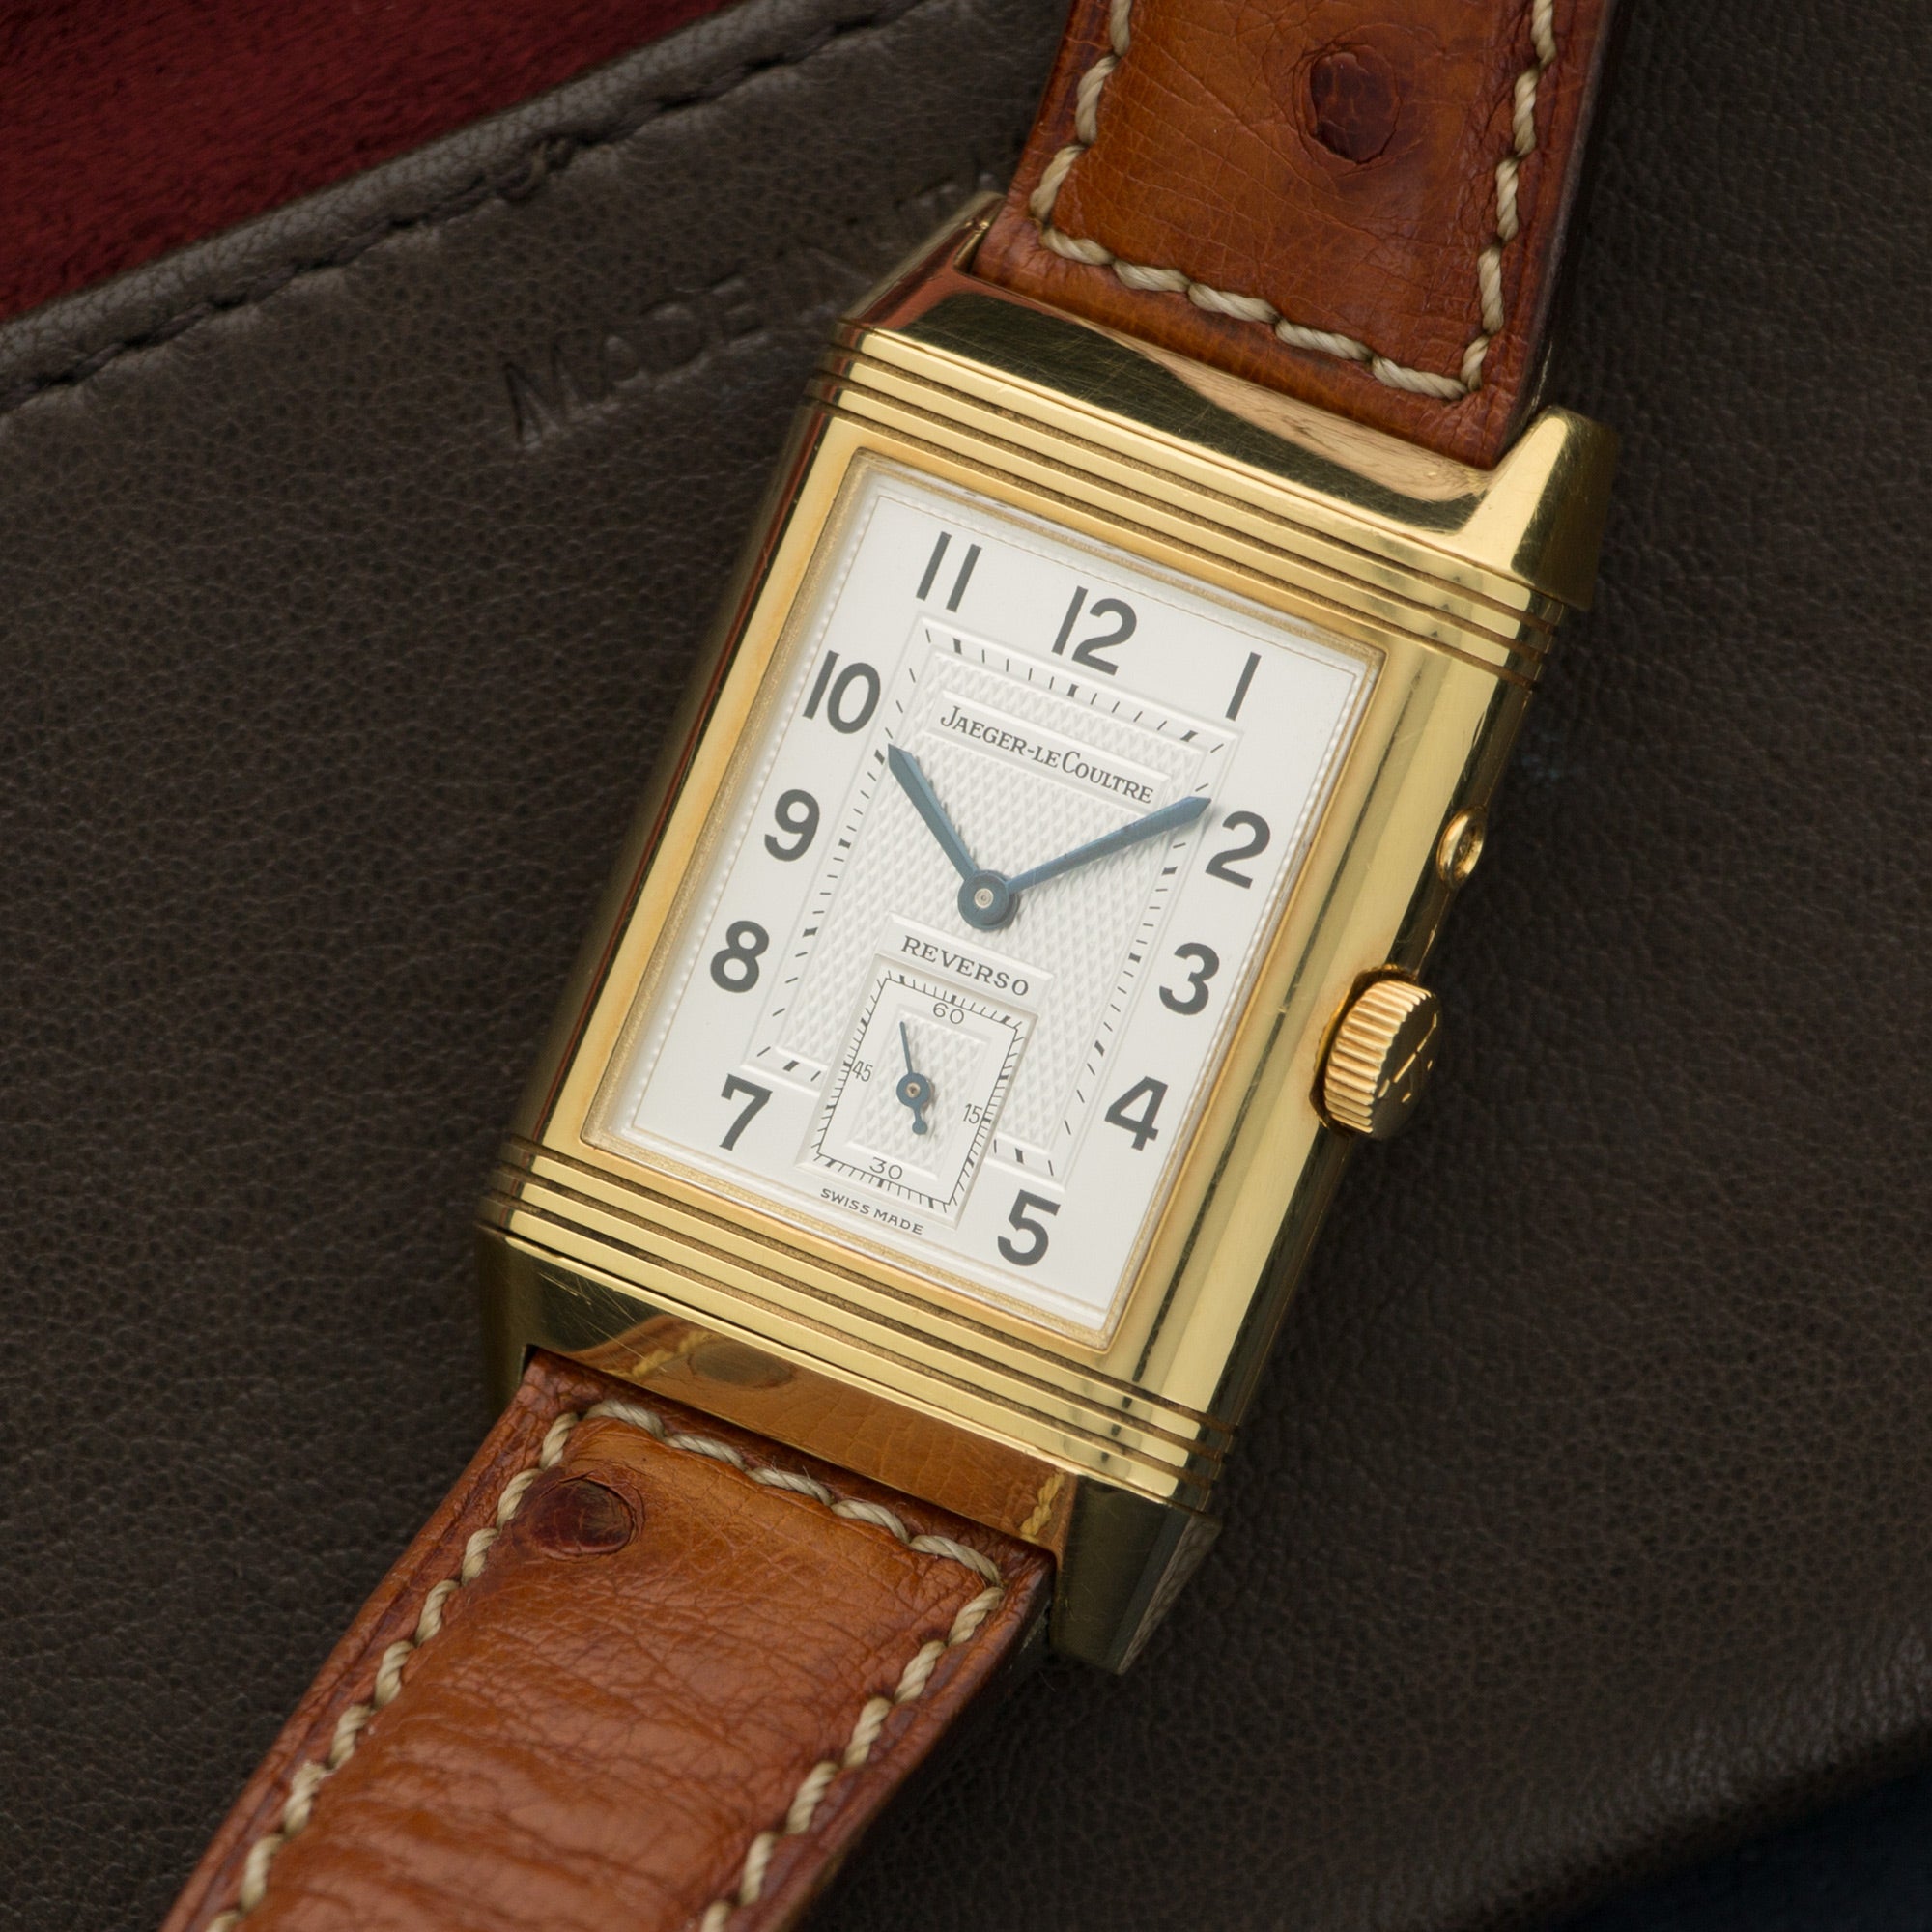 Jaeger LeCoultre - Jaeger Lecoultre Yellow Gold Reverso Day-Night Watch - The Keystone Watches